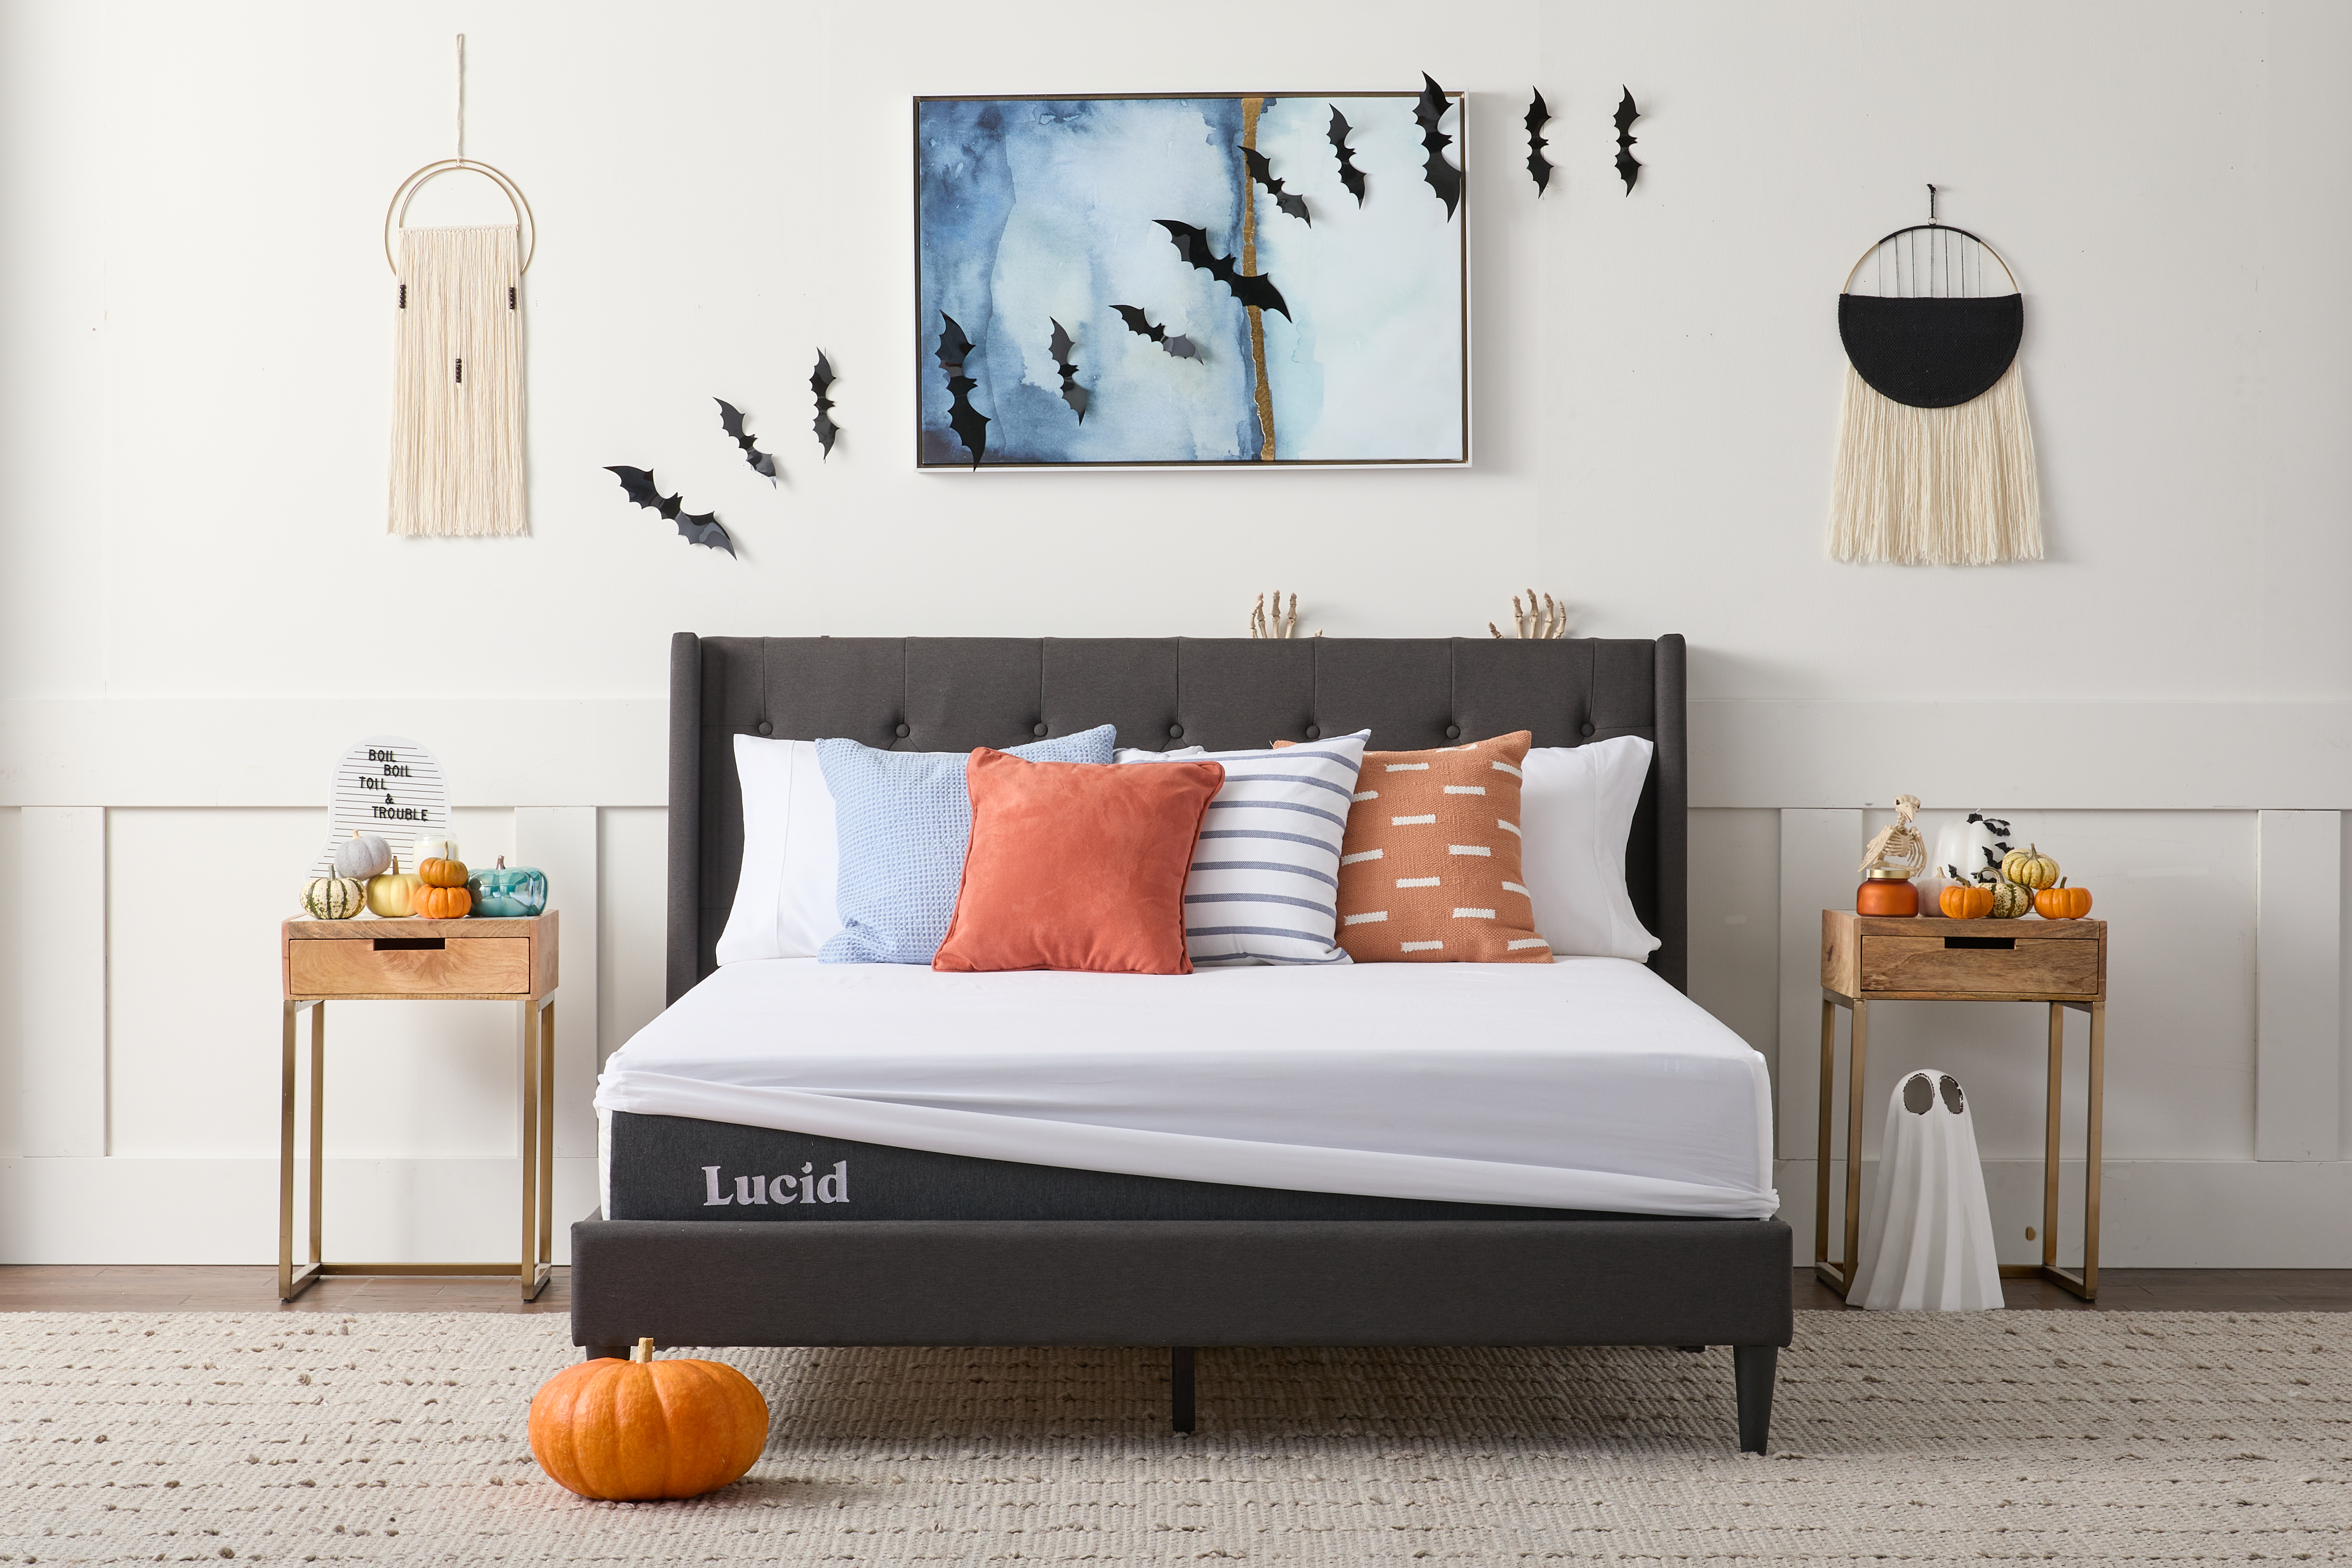 Bedroom decorated with bats, ghosts and pumpkins.